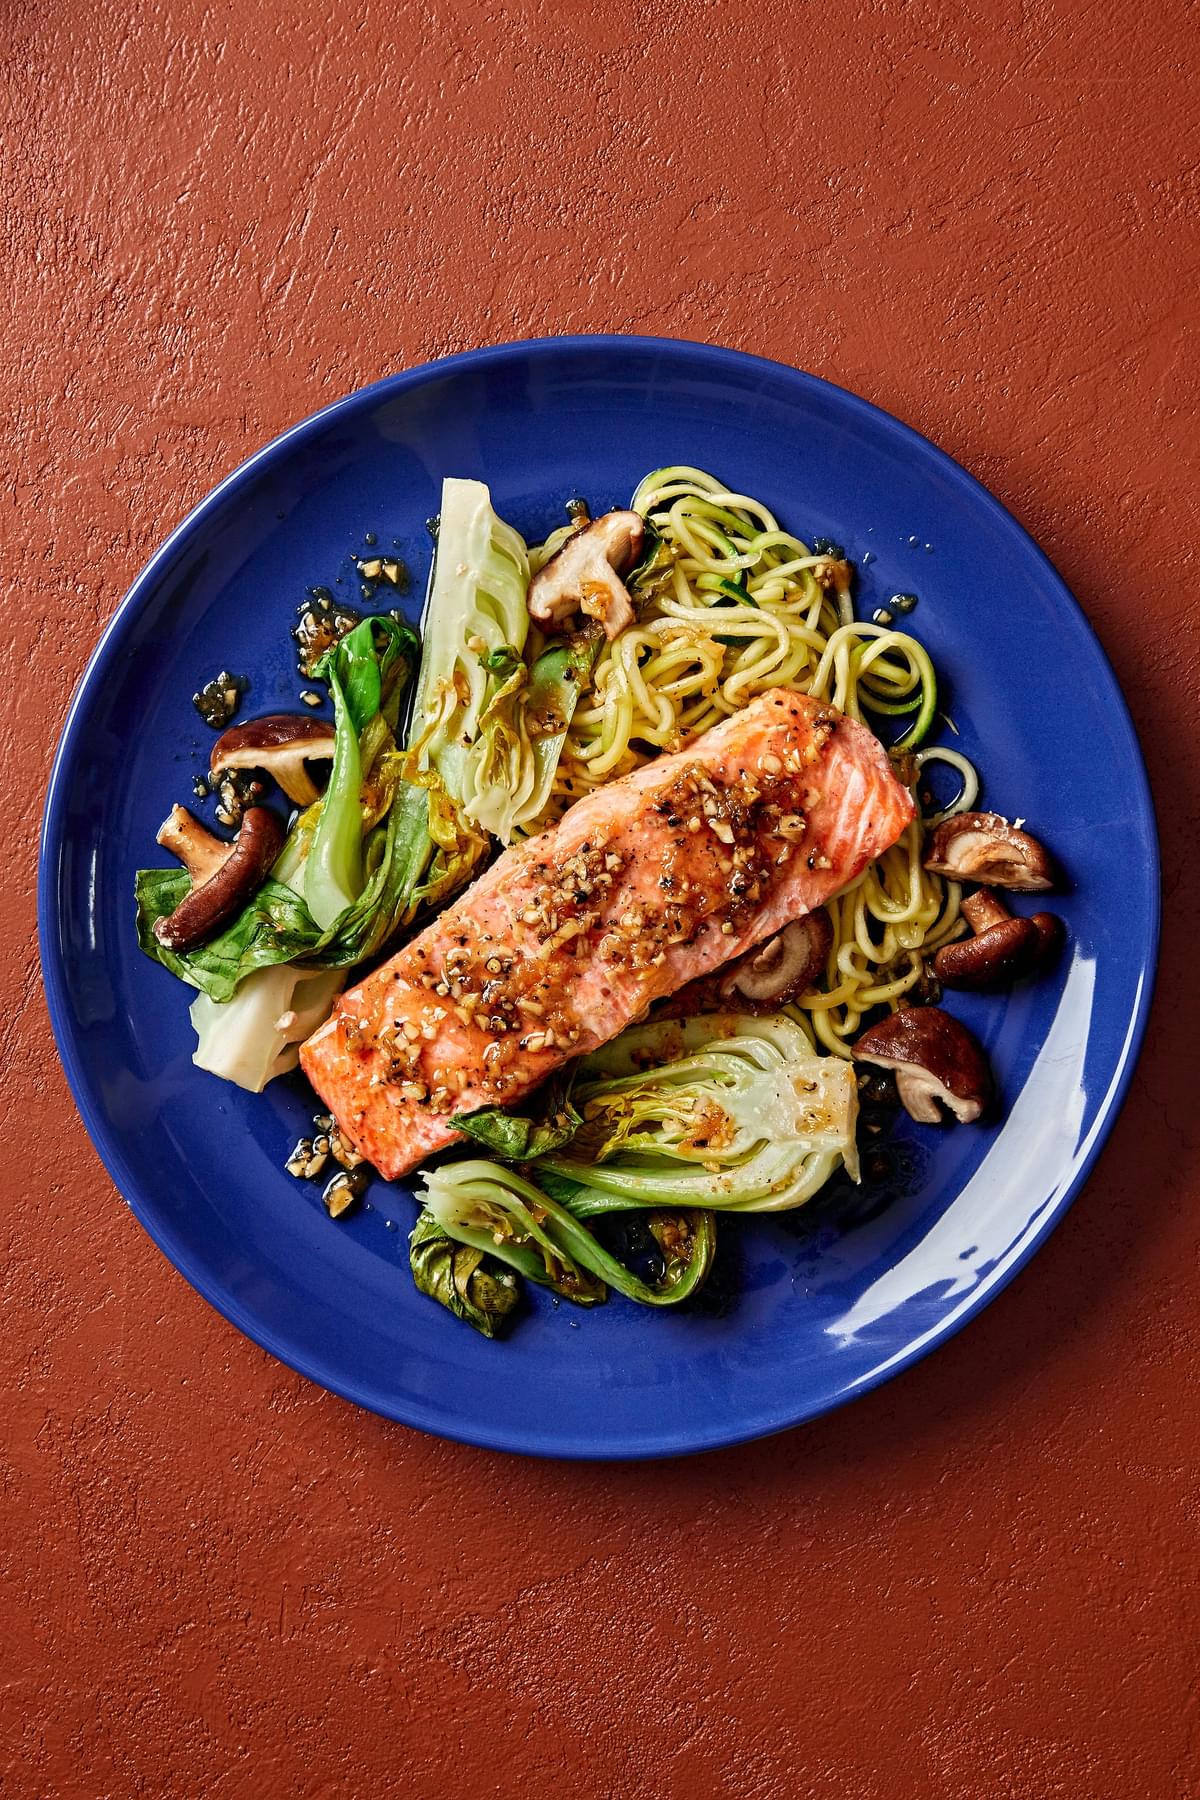 garlic ginger salmon on a plate with zucchini noodles, bok choy and shitake mushrooms